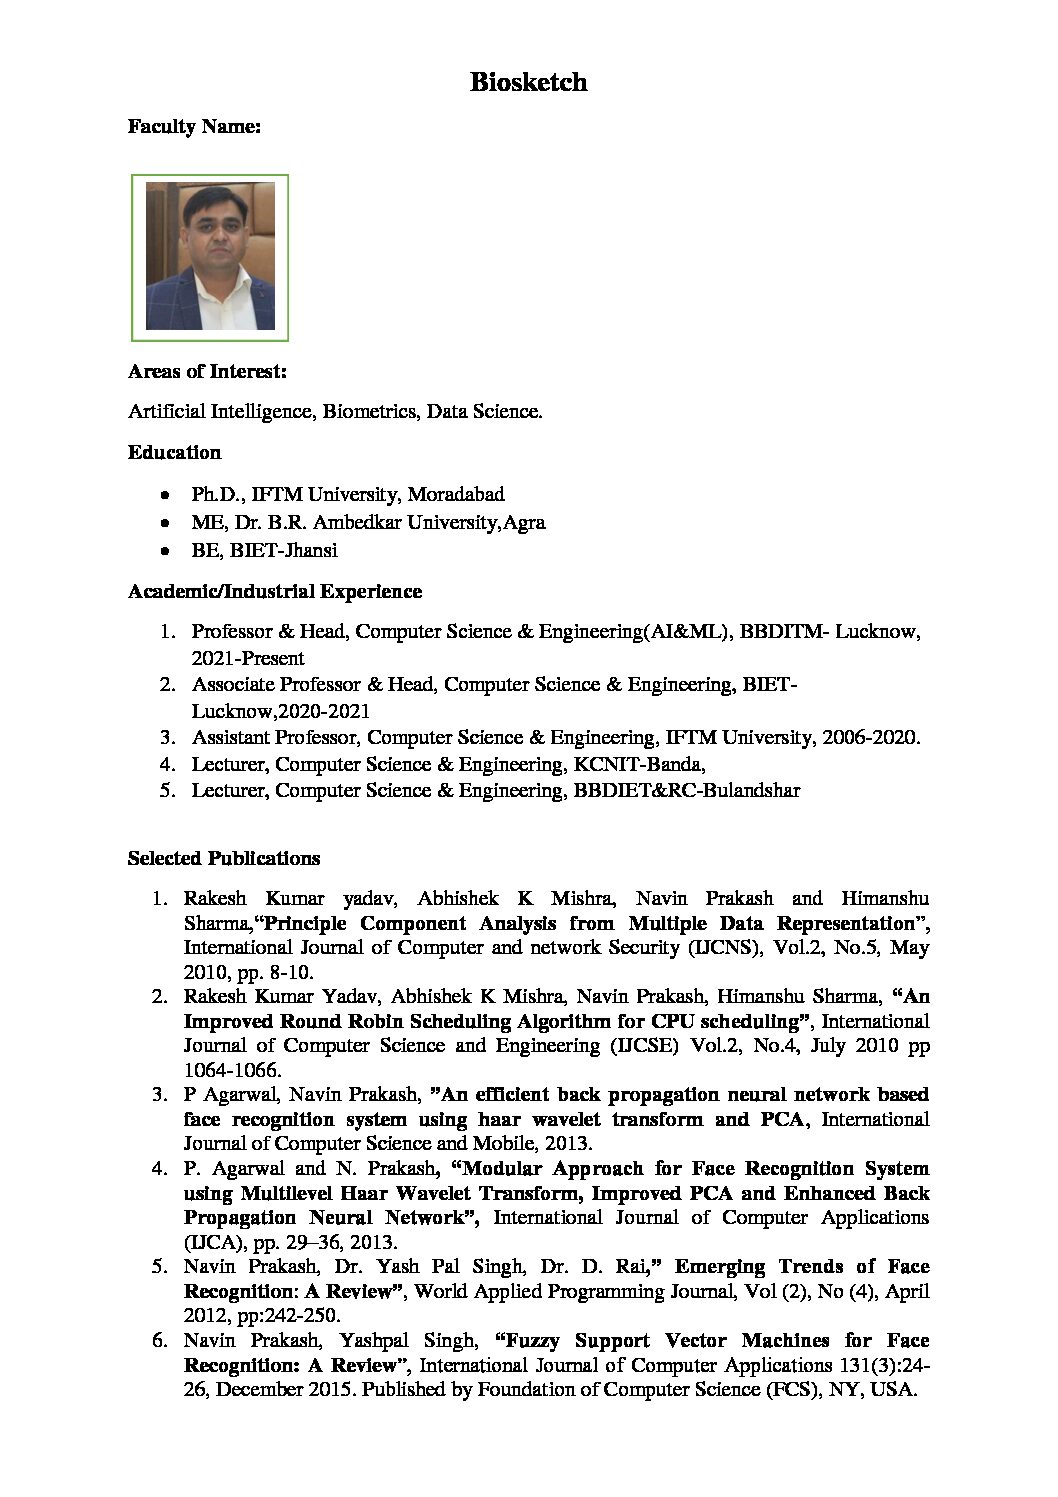 Biographical Sketch Format Page - American Society for ...